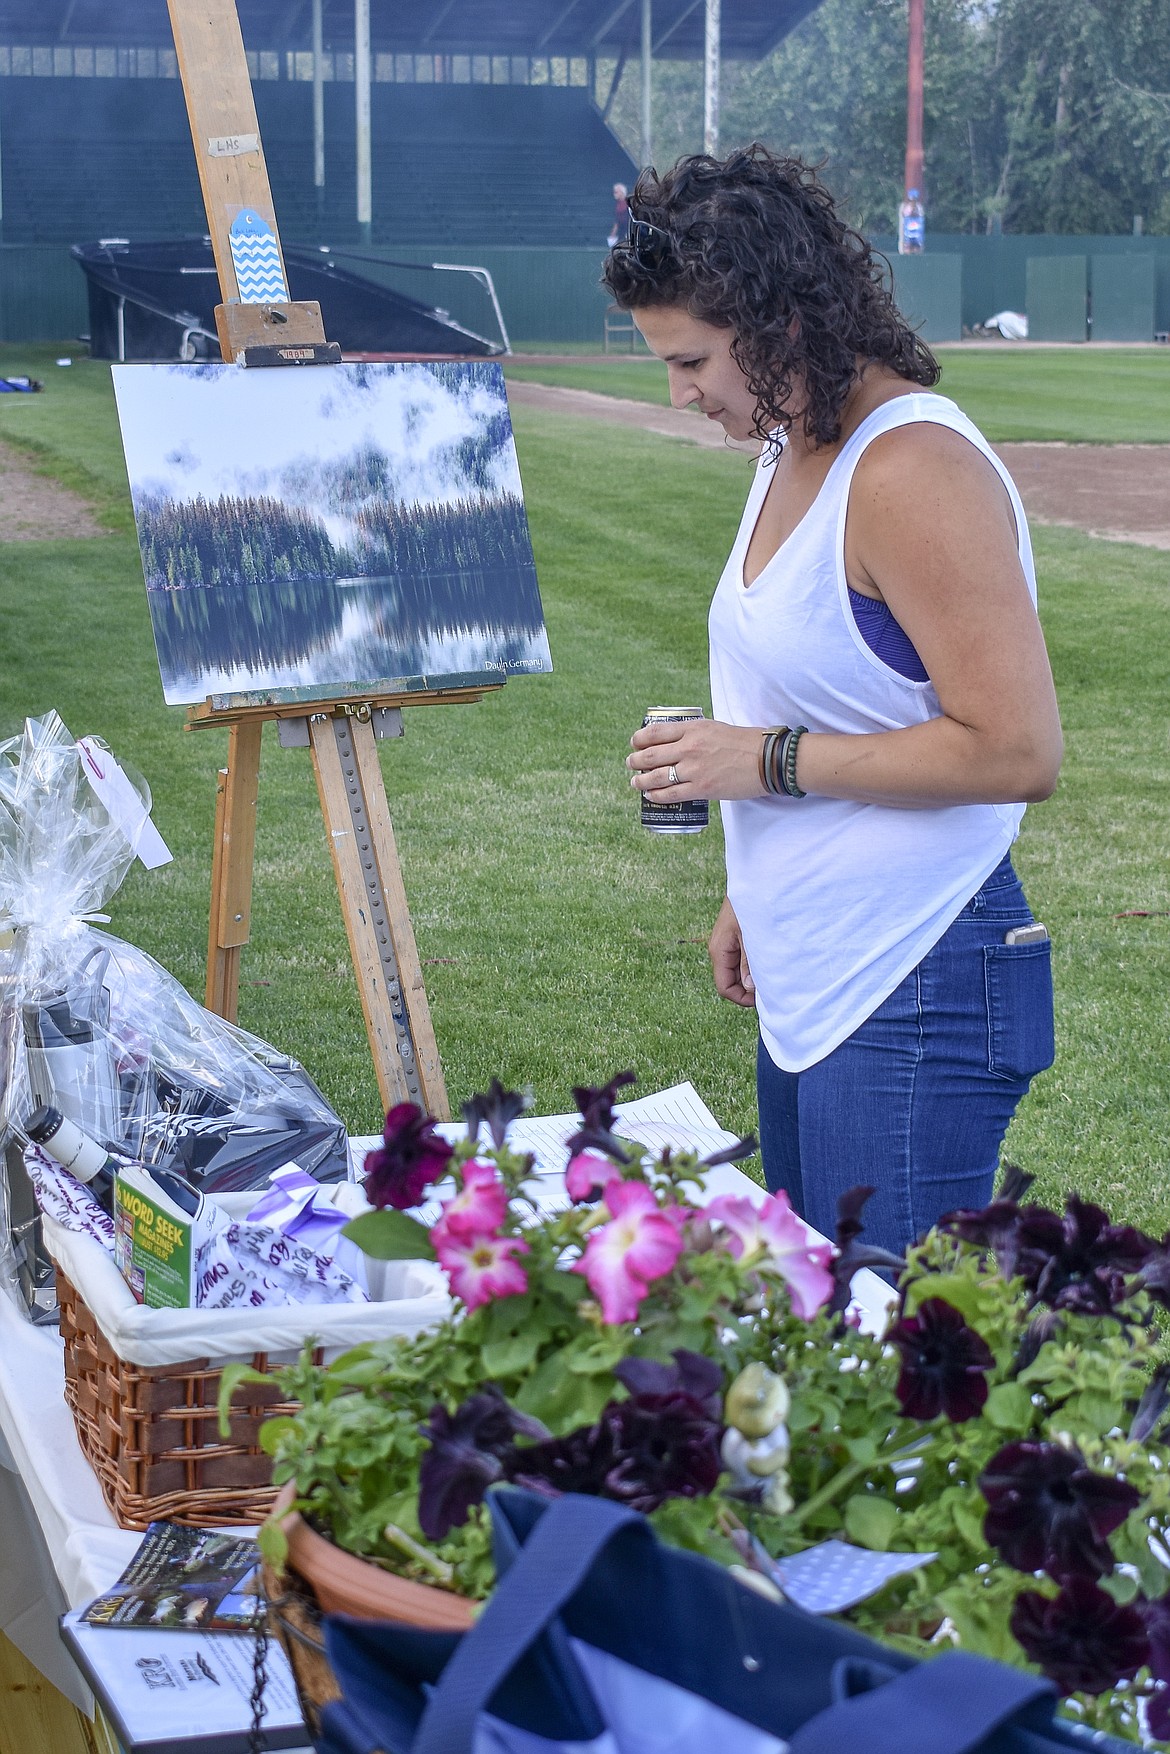 Liz Whalen checks out some of the silent auction items during the annual Dinner On The Diamond fundraiser at Lee Gehring Field on Friday. (Ben Kibbey/The Western News)